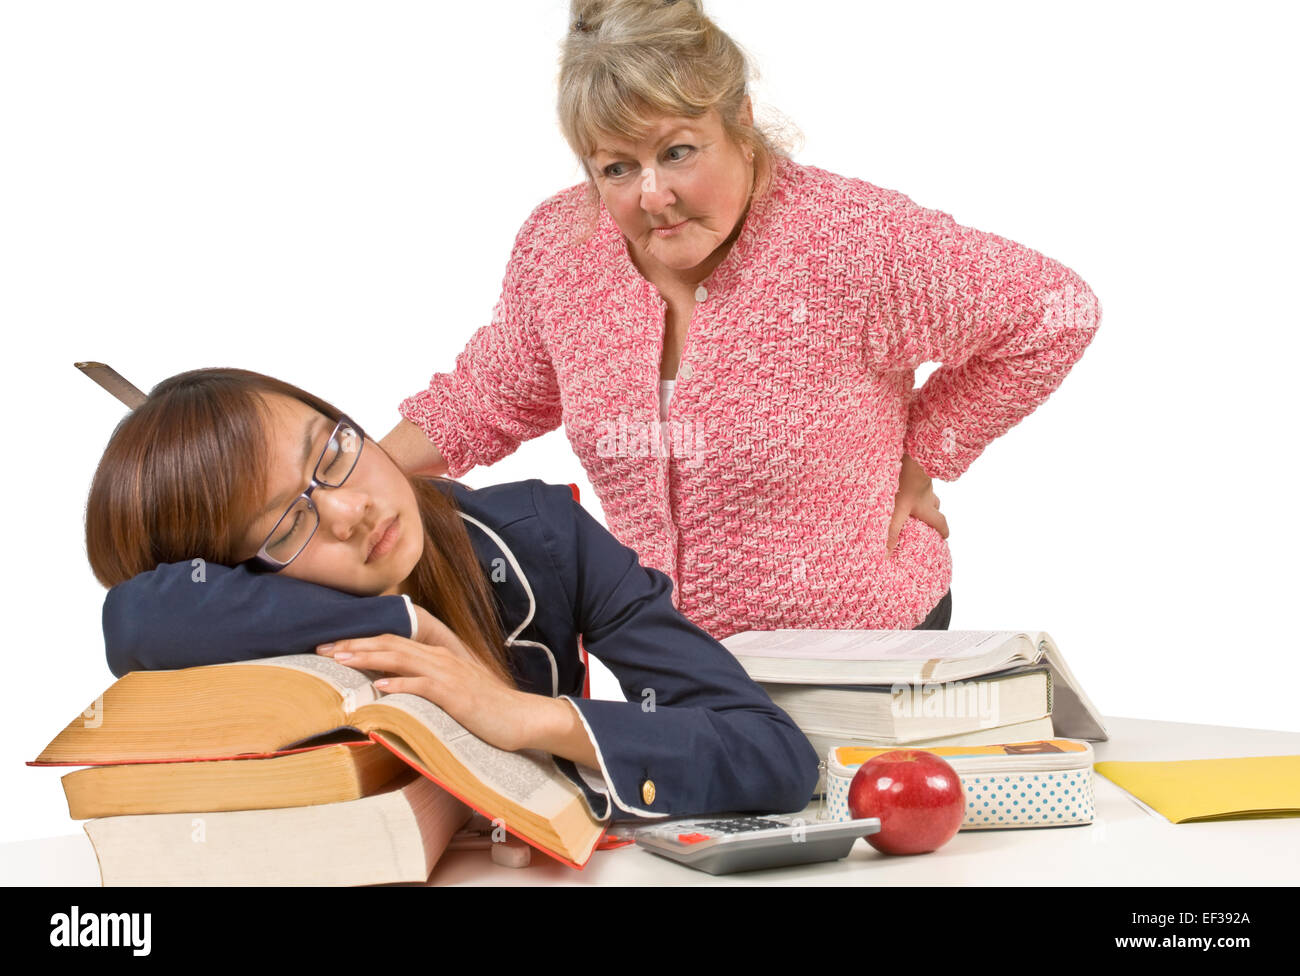 Angry teacher looking at sleeping student Stock Photo